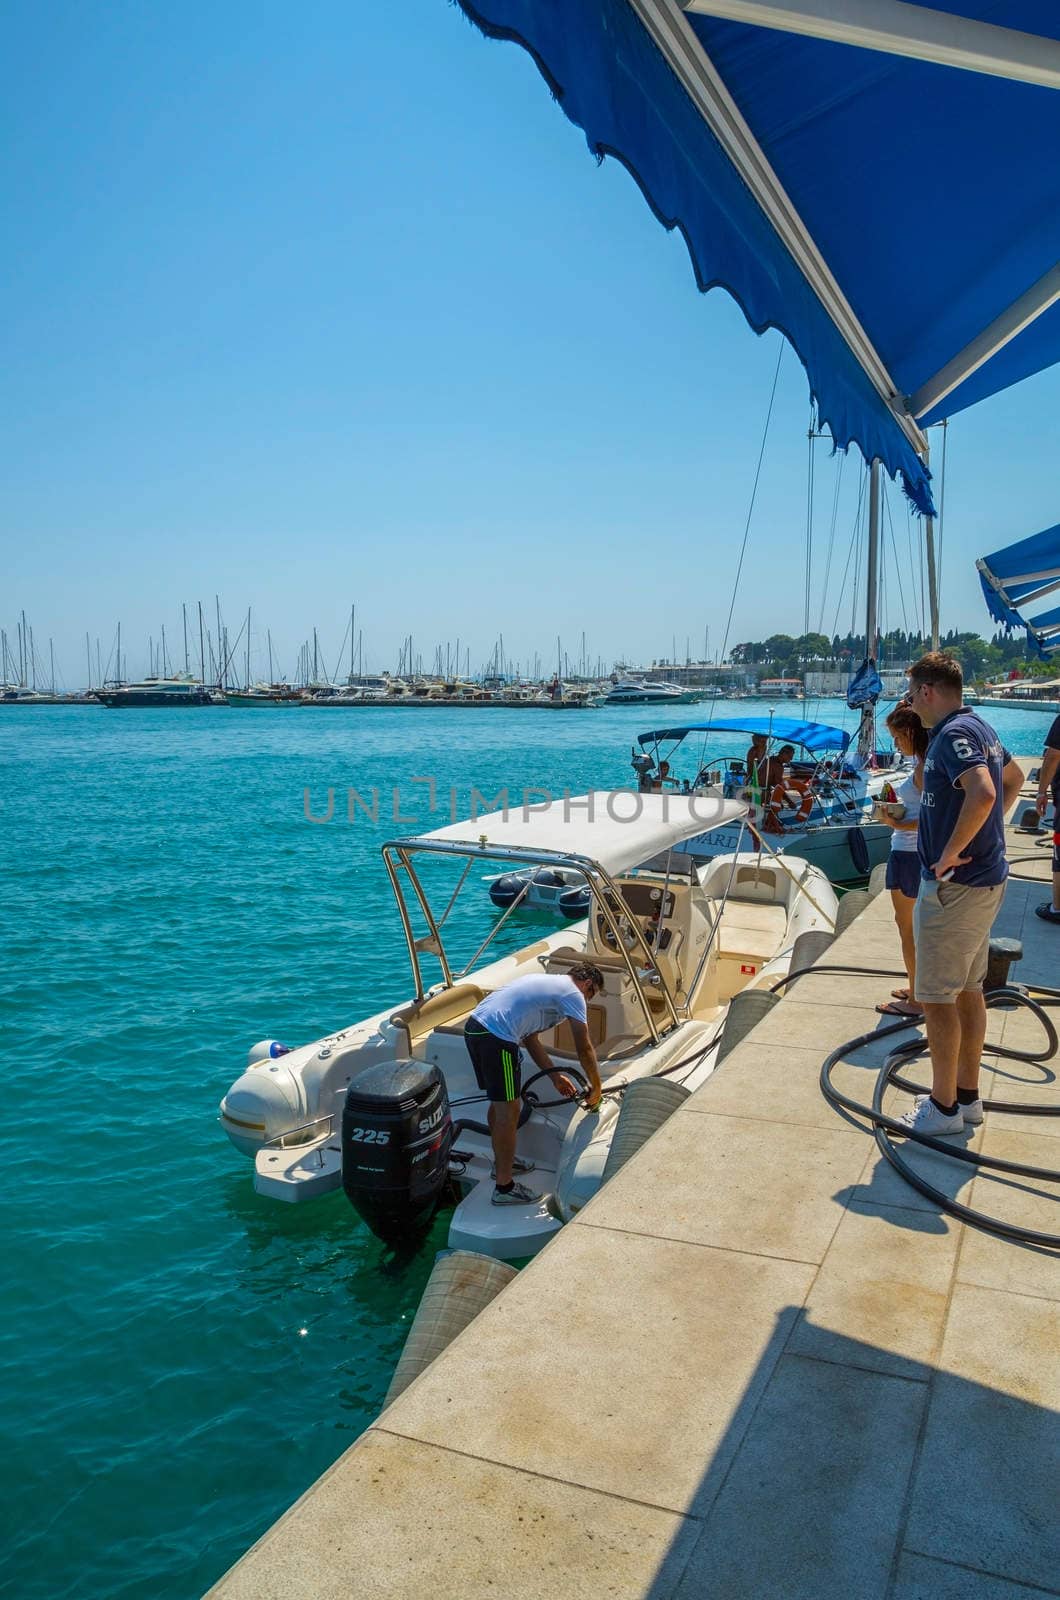 SPLIT, CROATIA - 19 JUL 2015: Boat refuels at a petrol station for ships and boats at the port